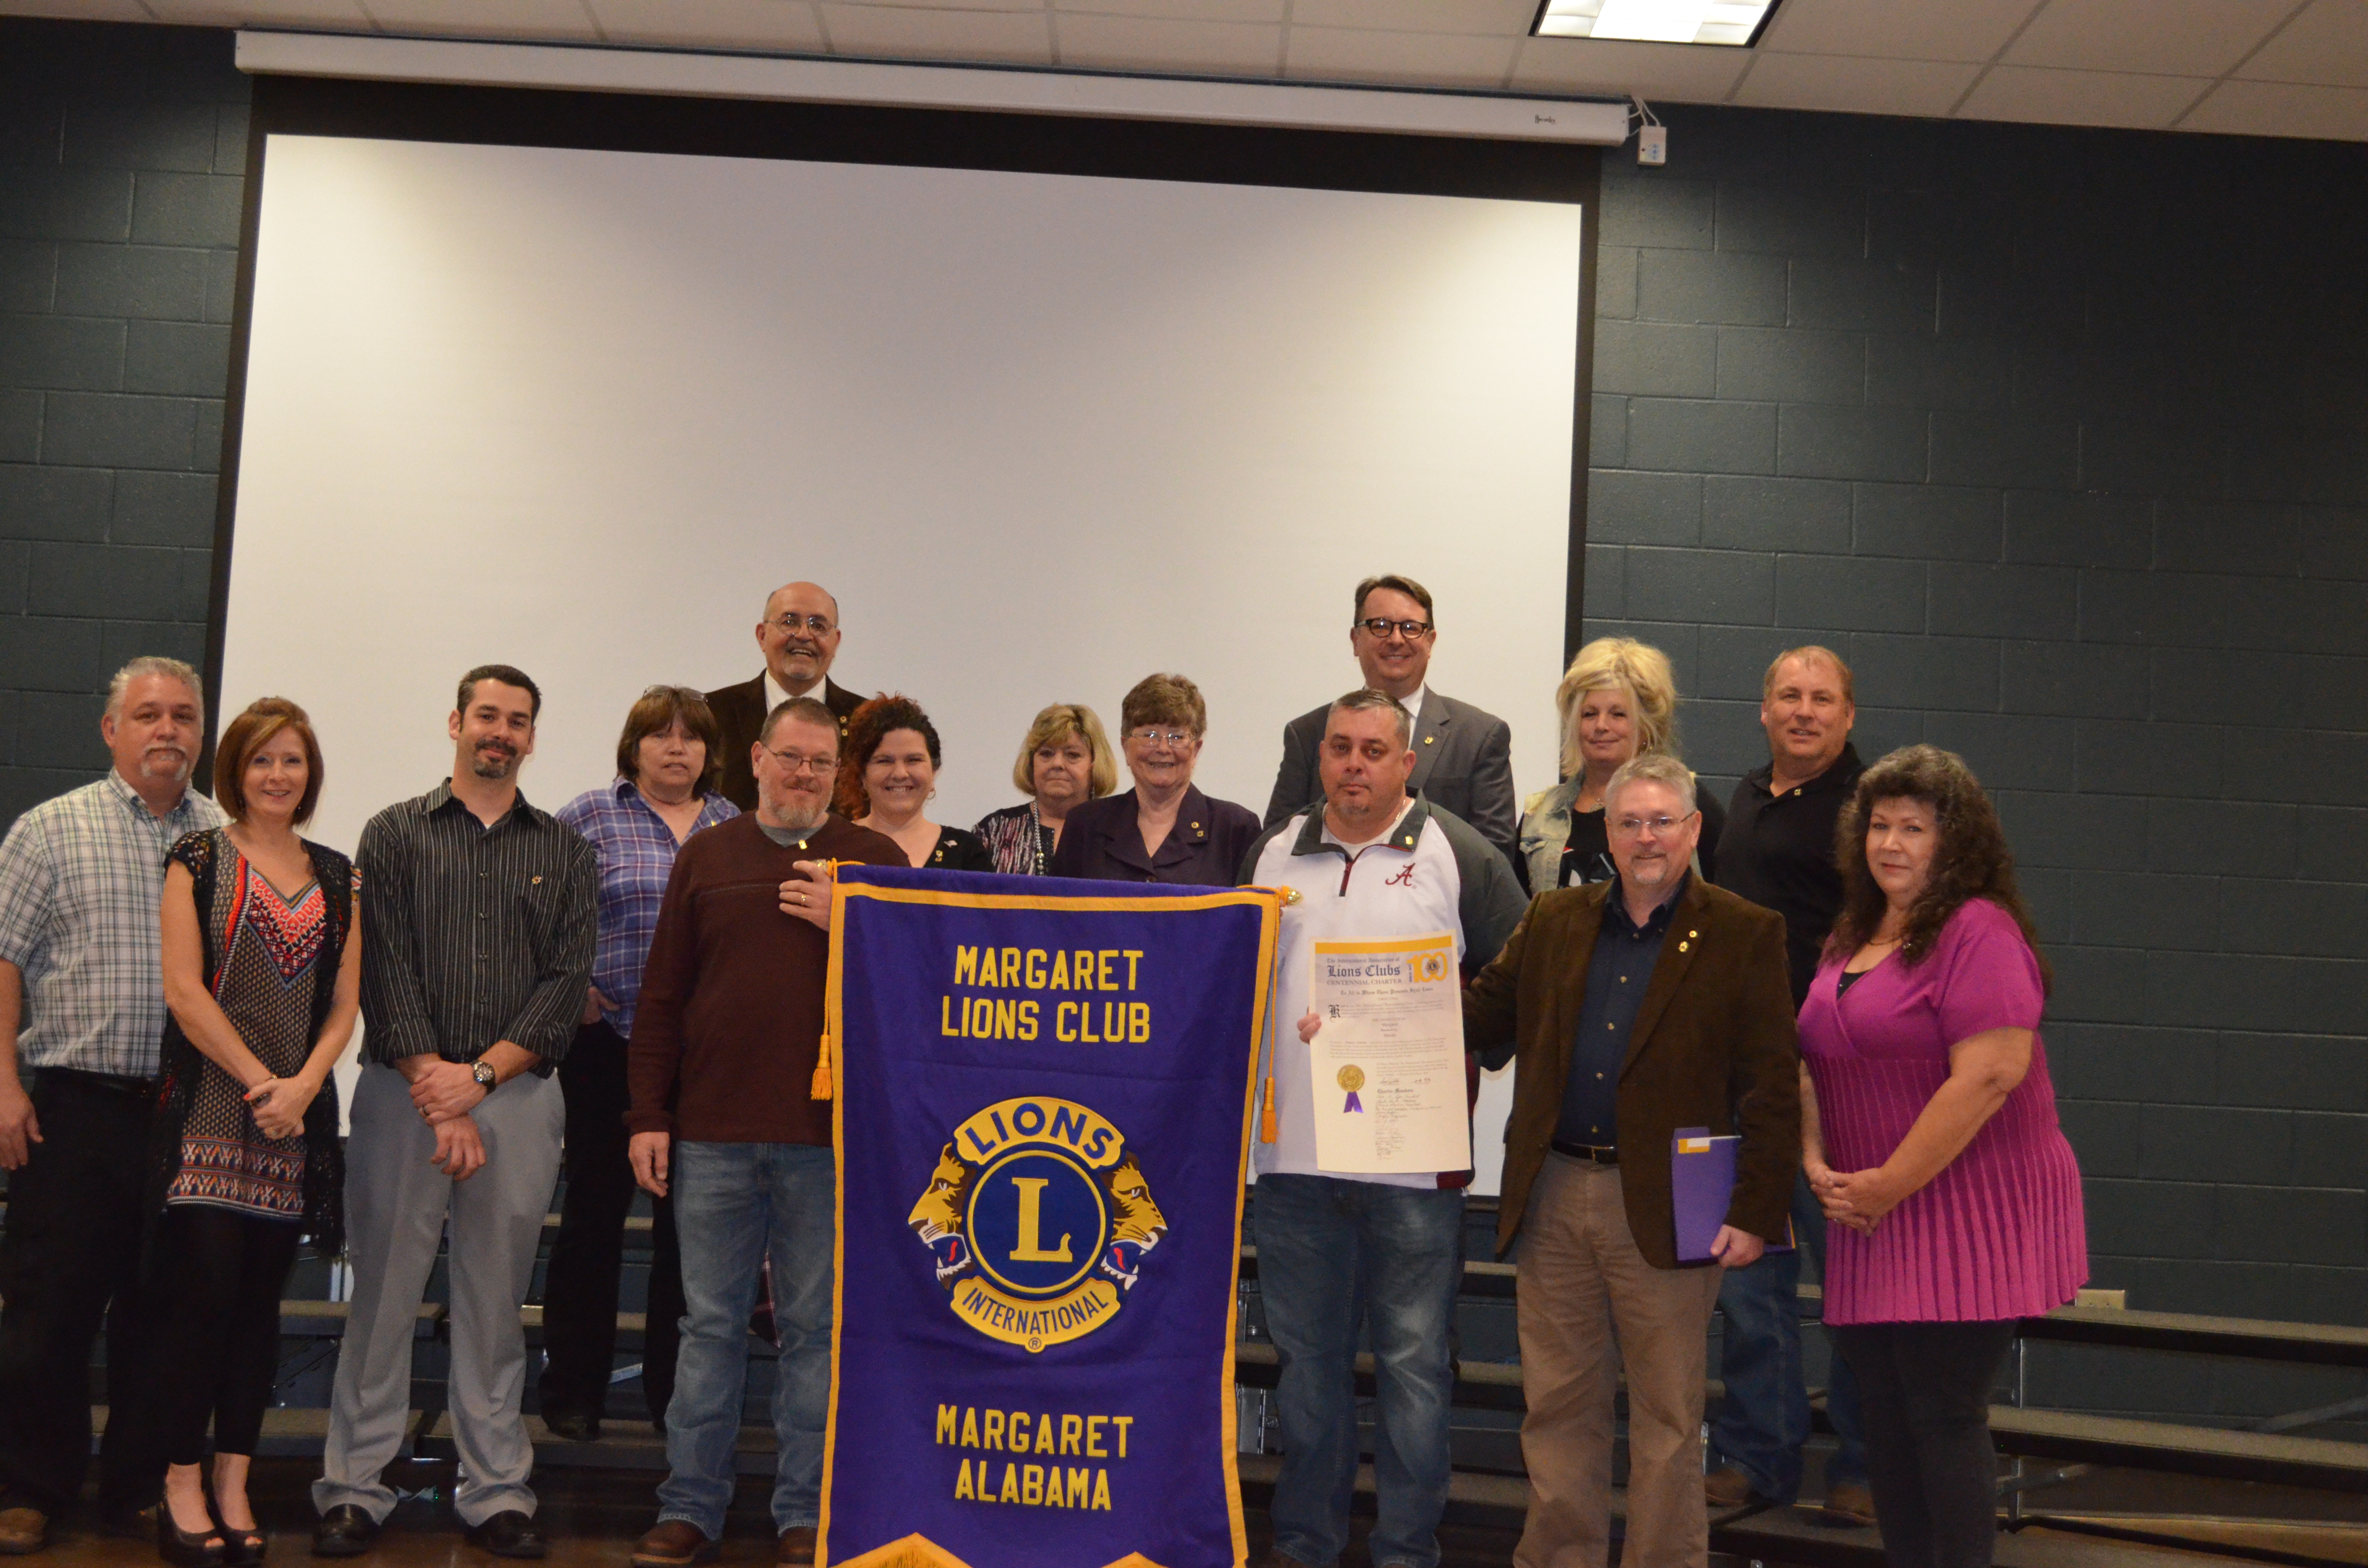 Lions Club charters new club in Margaret